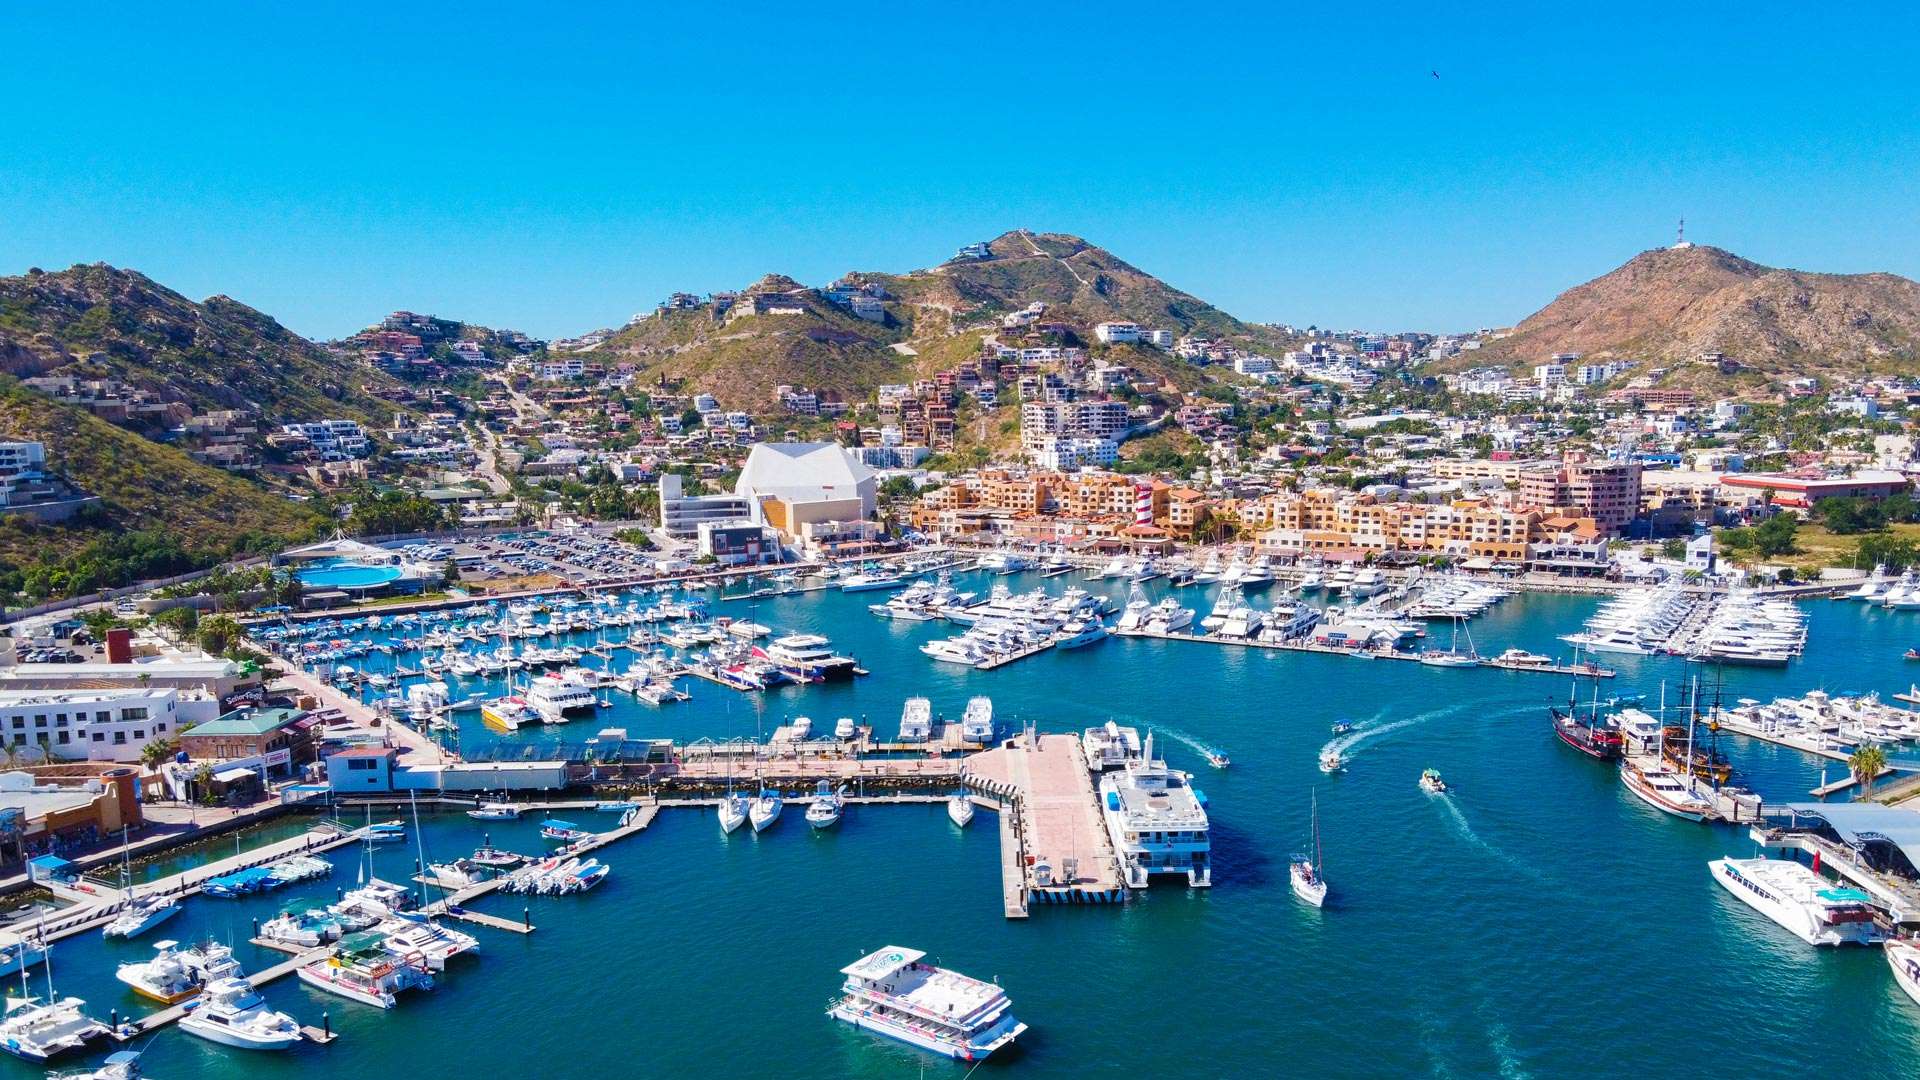 What to do in Cabo Marina